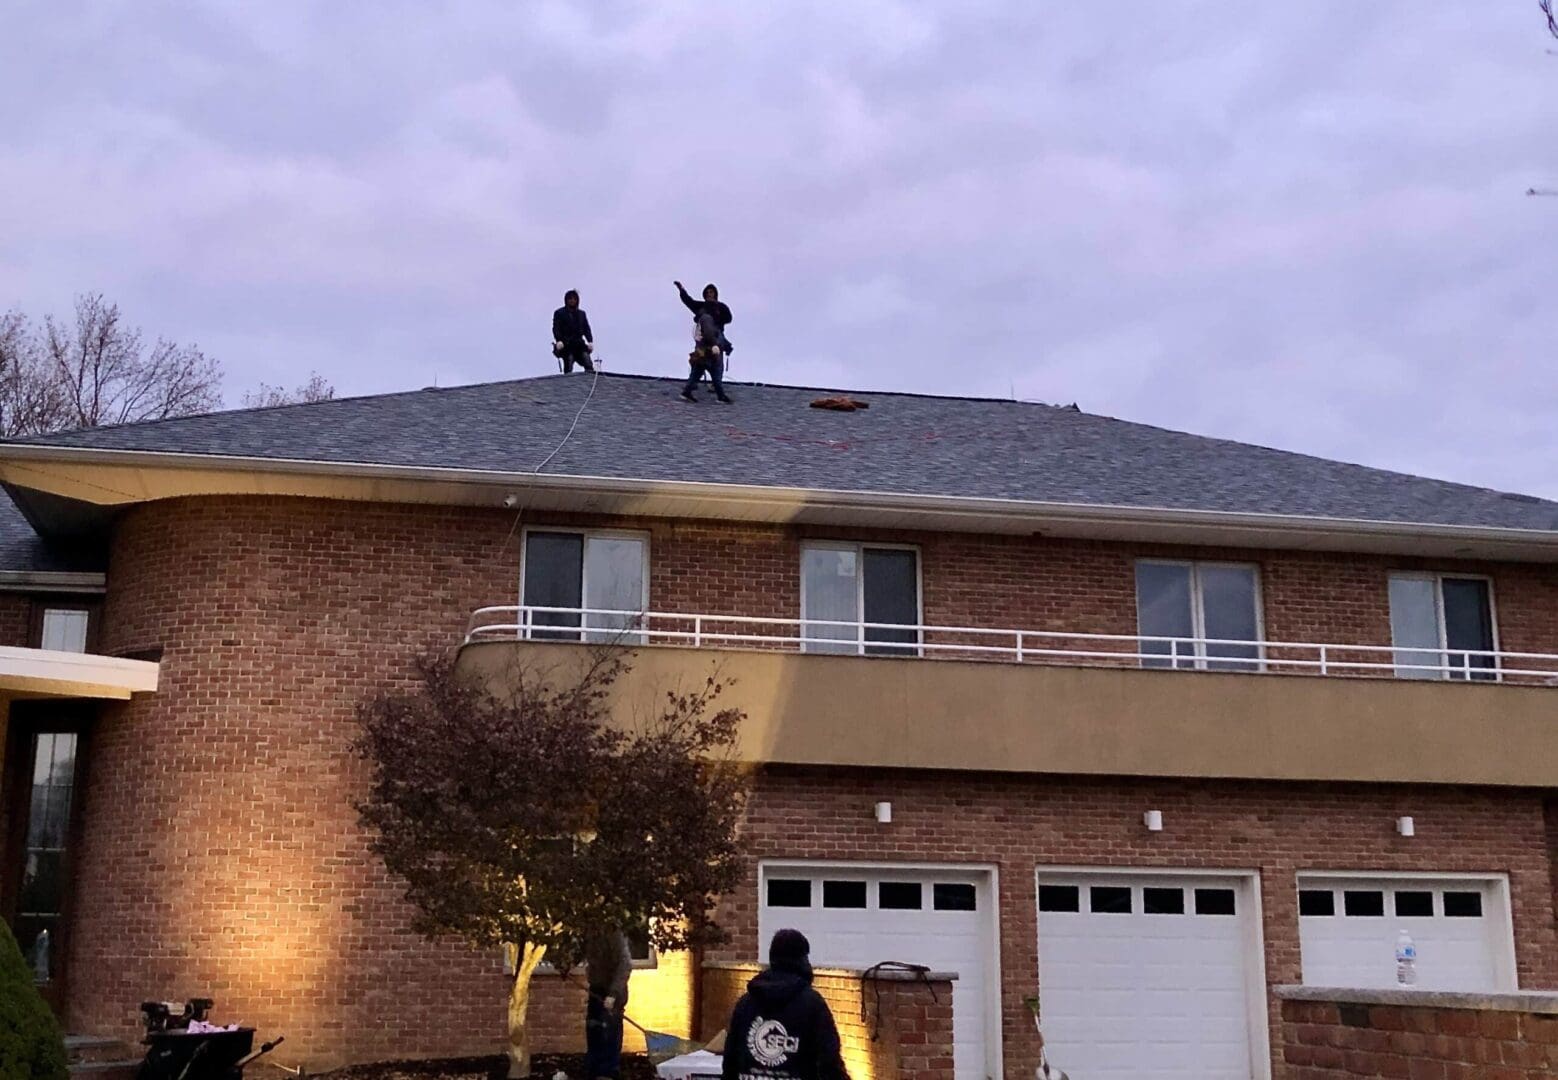 Two men standing on the roof of a house.